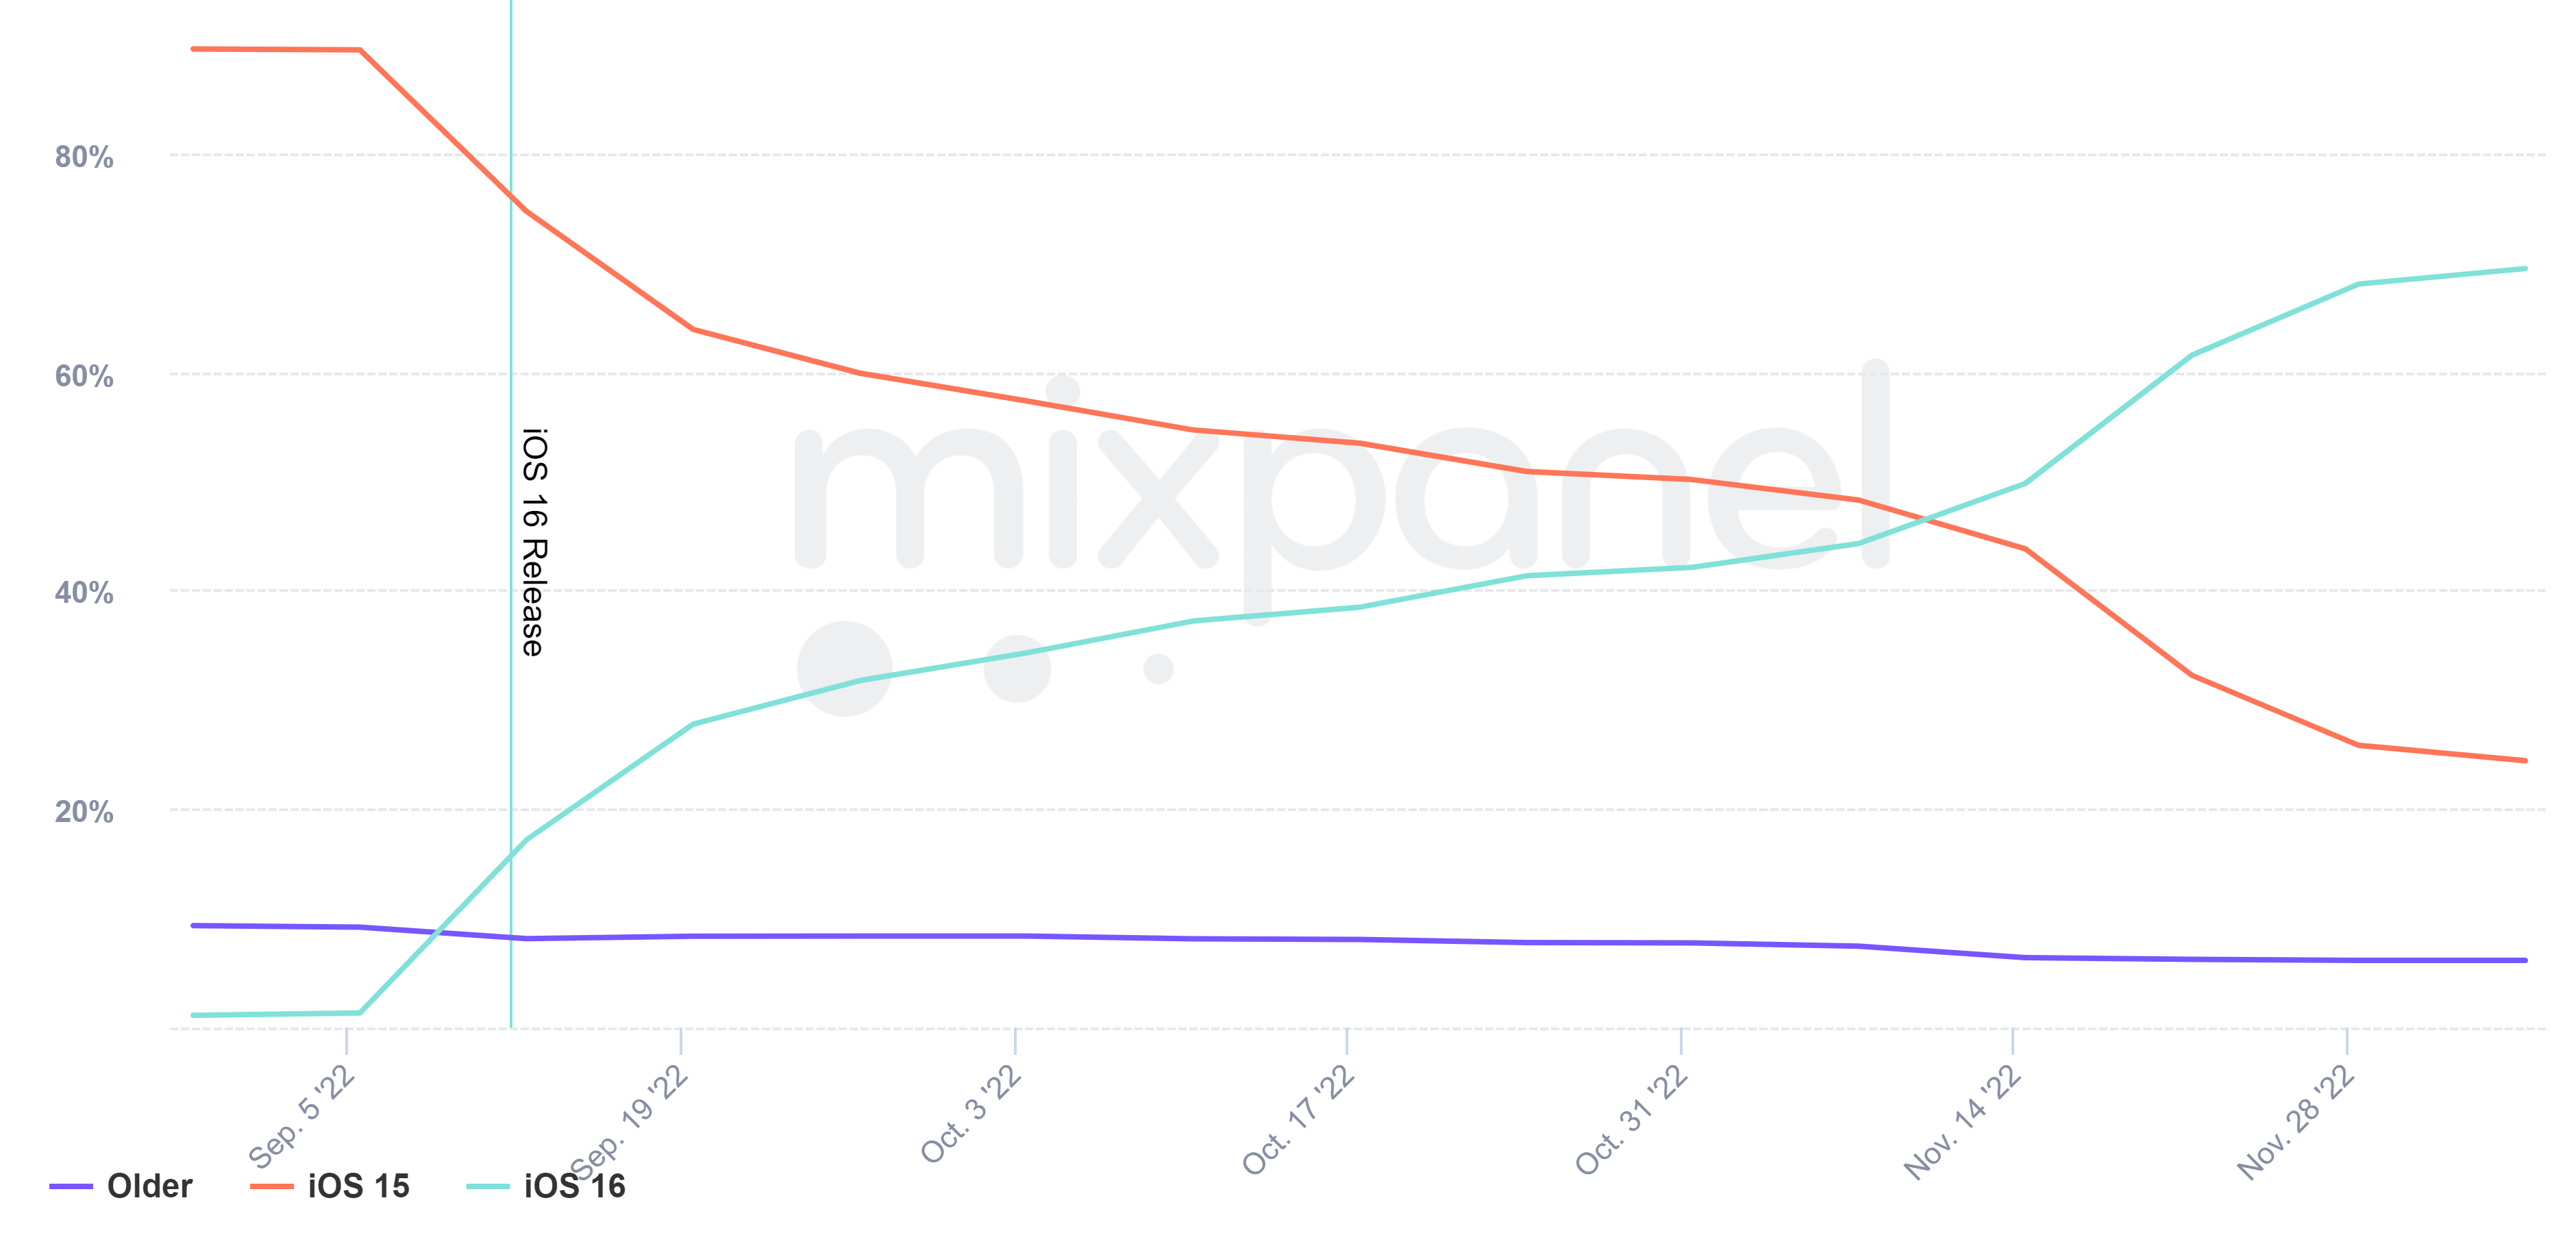 iOS 16 adoption stats as reported by Mixpanel - Nice: iOS 16's slow adoption rate hits 69% in December